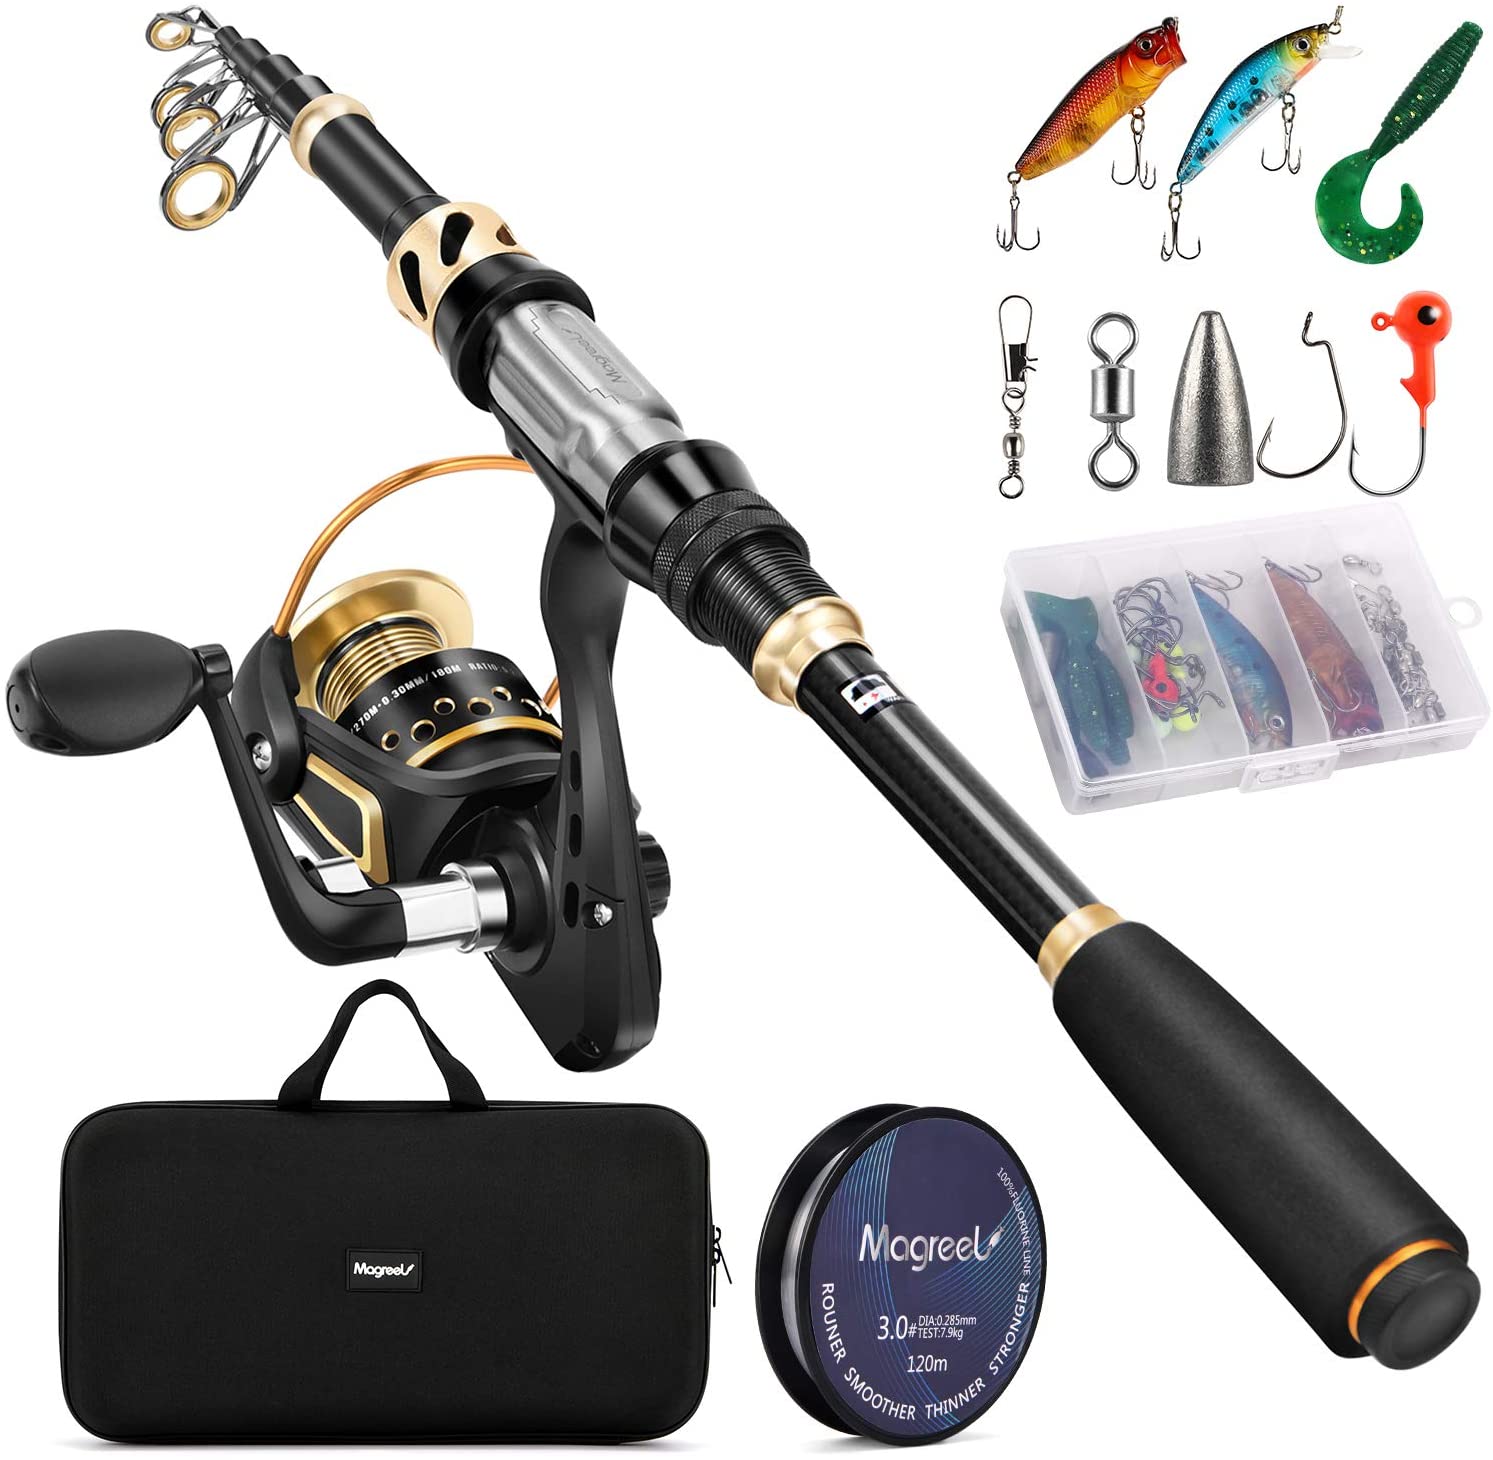 best fishing rod Magreel Telescopic Fishing Rod and Reel Combo Set with Fishing Line, Fishing Lures Kit& Accessories and Carrier Bag for Saltwater Freshwater